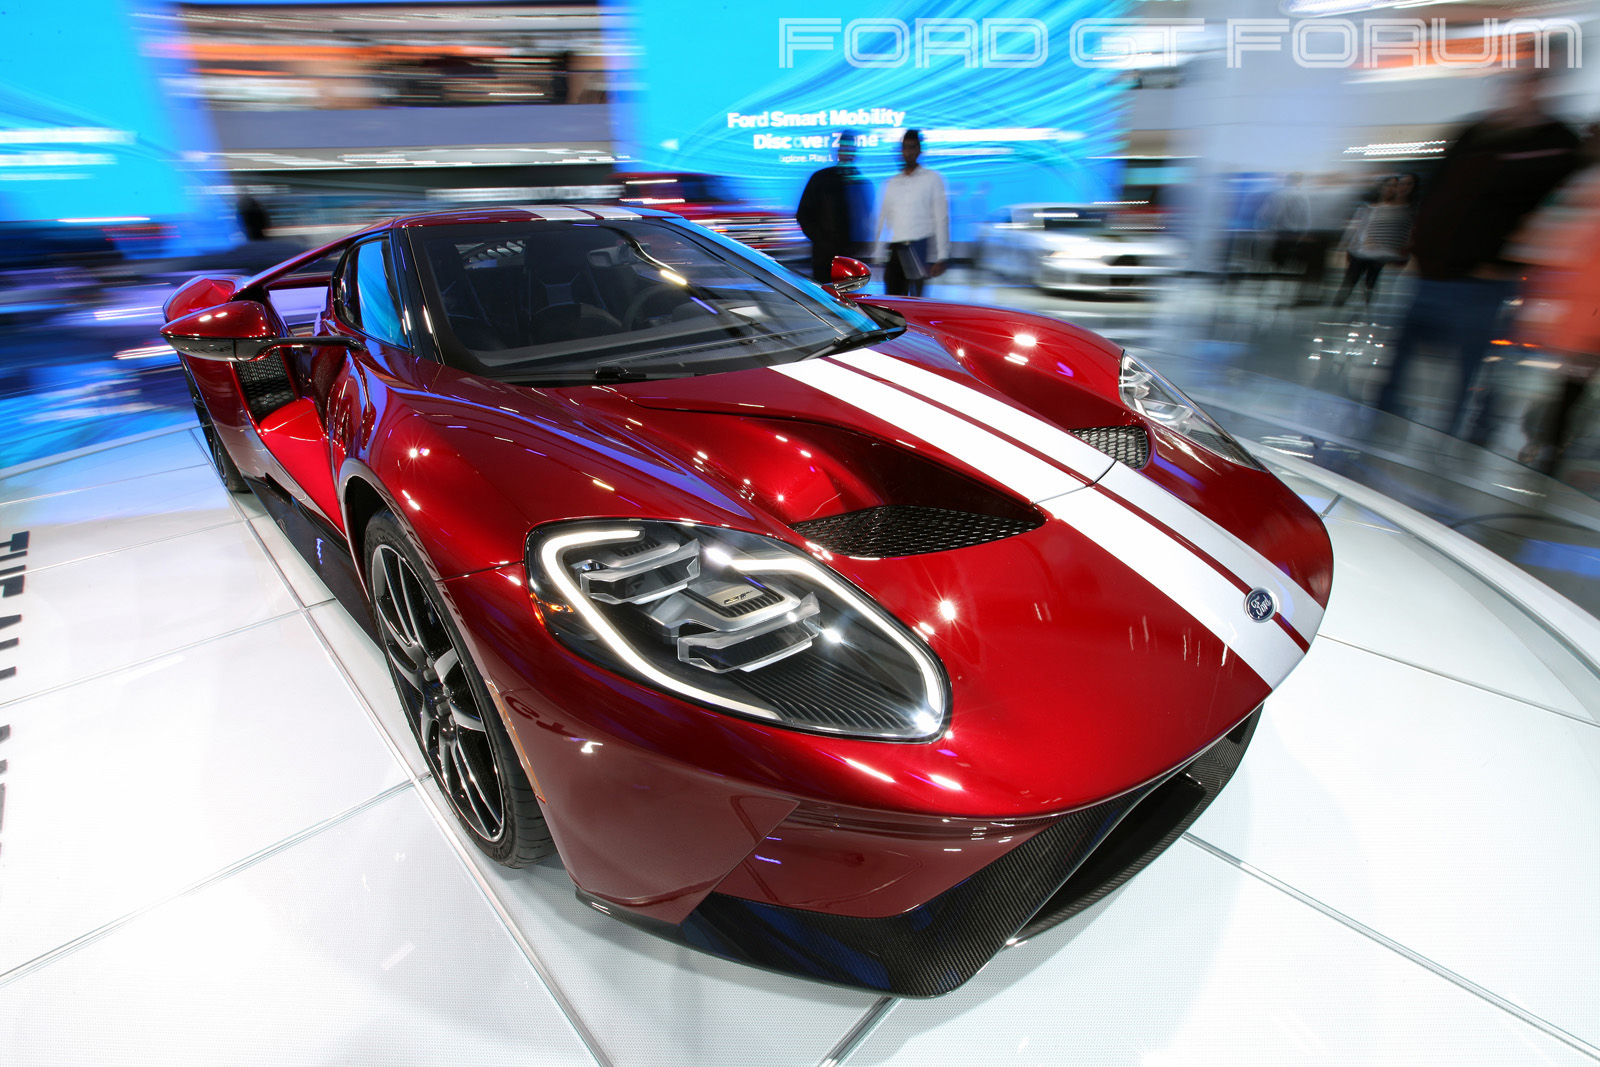 Ford-GT-Autoshow-3000-4